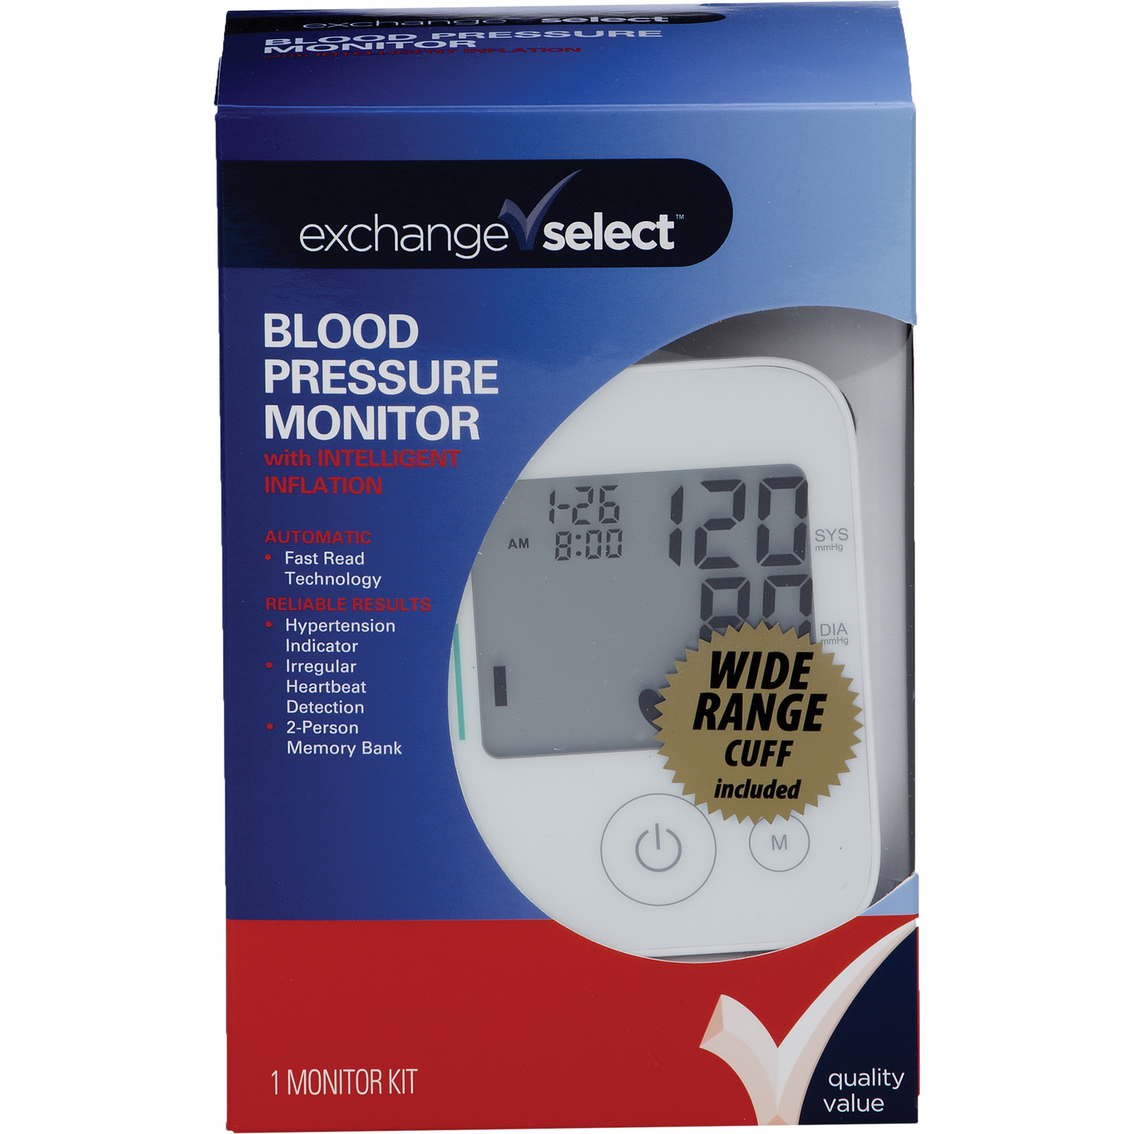 Exchange Select Automatic Digital Arm Blood Pressure Monitor - Image 2 of 2